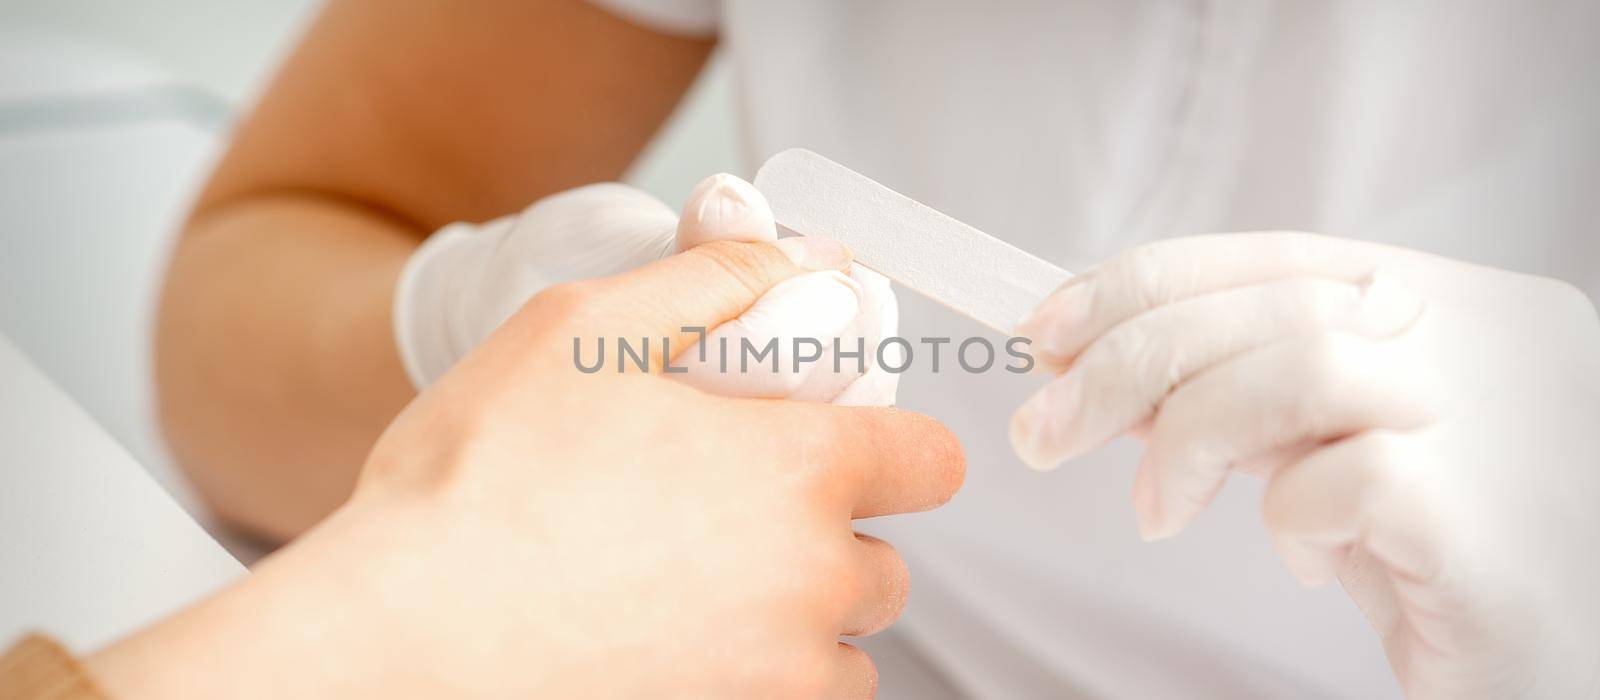 Close up of the hand of young woman receiving the nail file procedure in a beauty salon